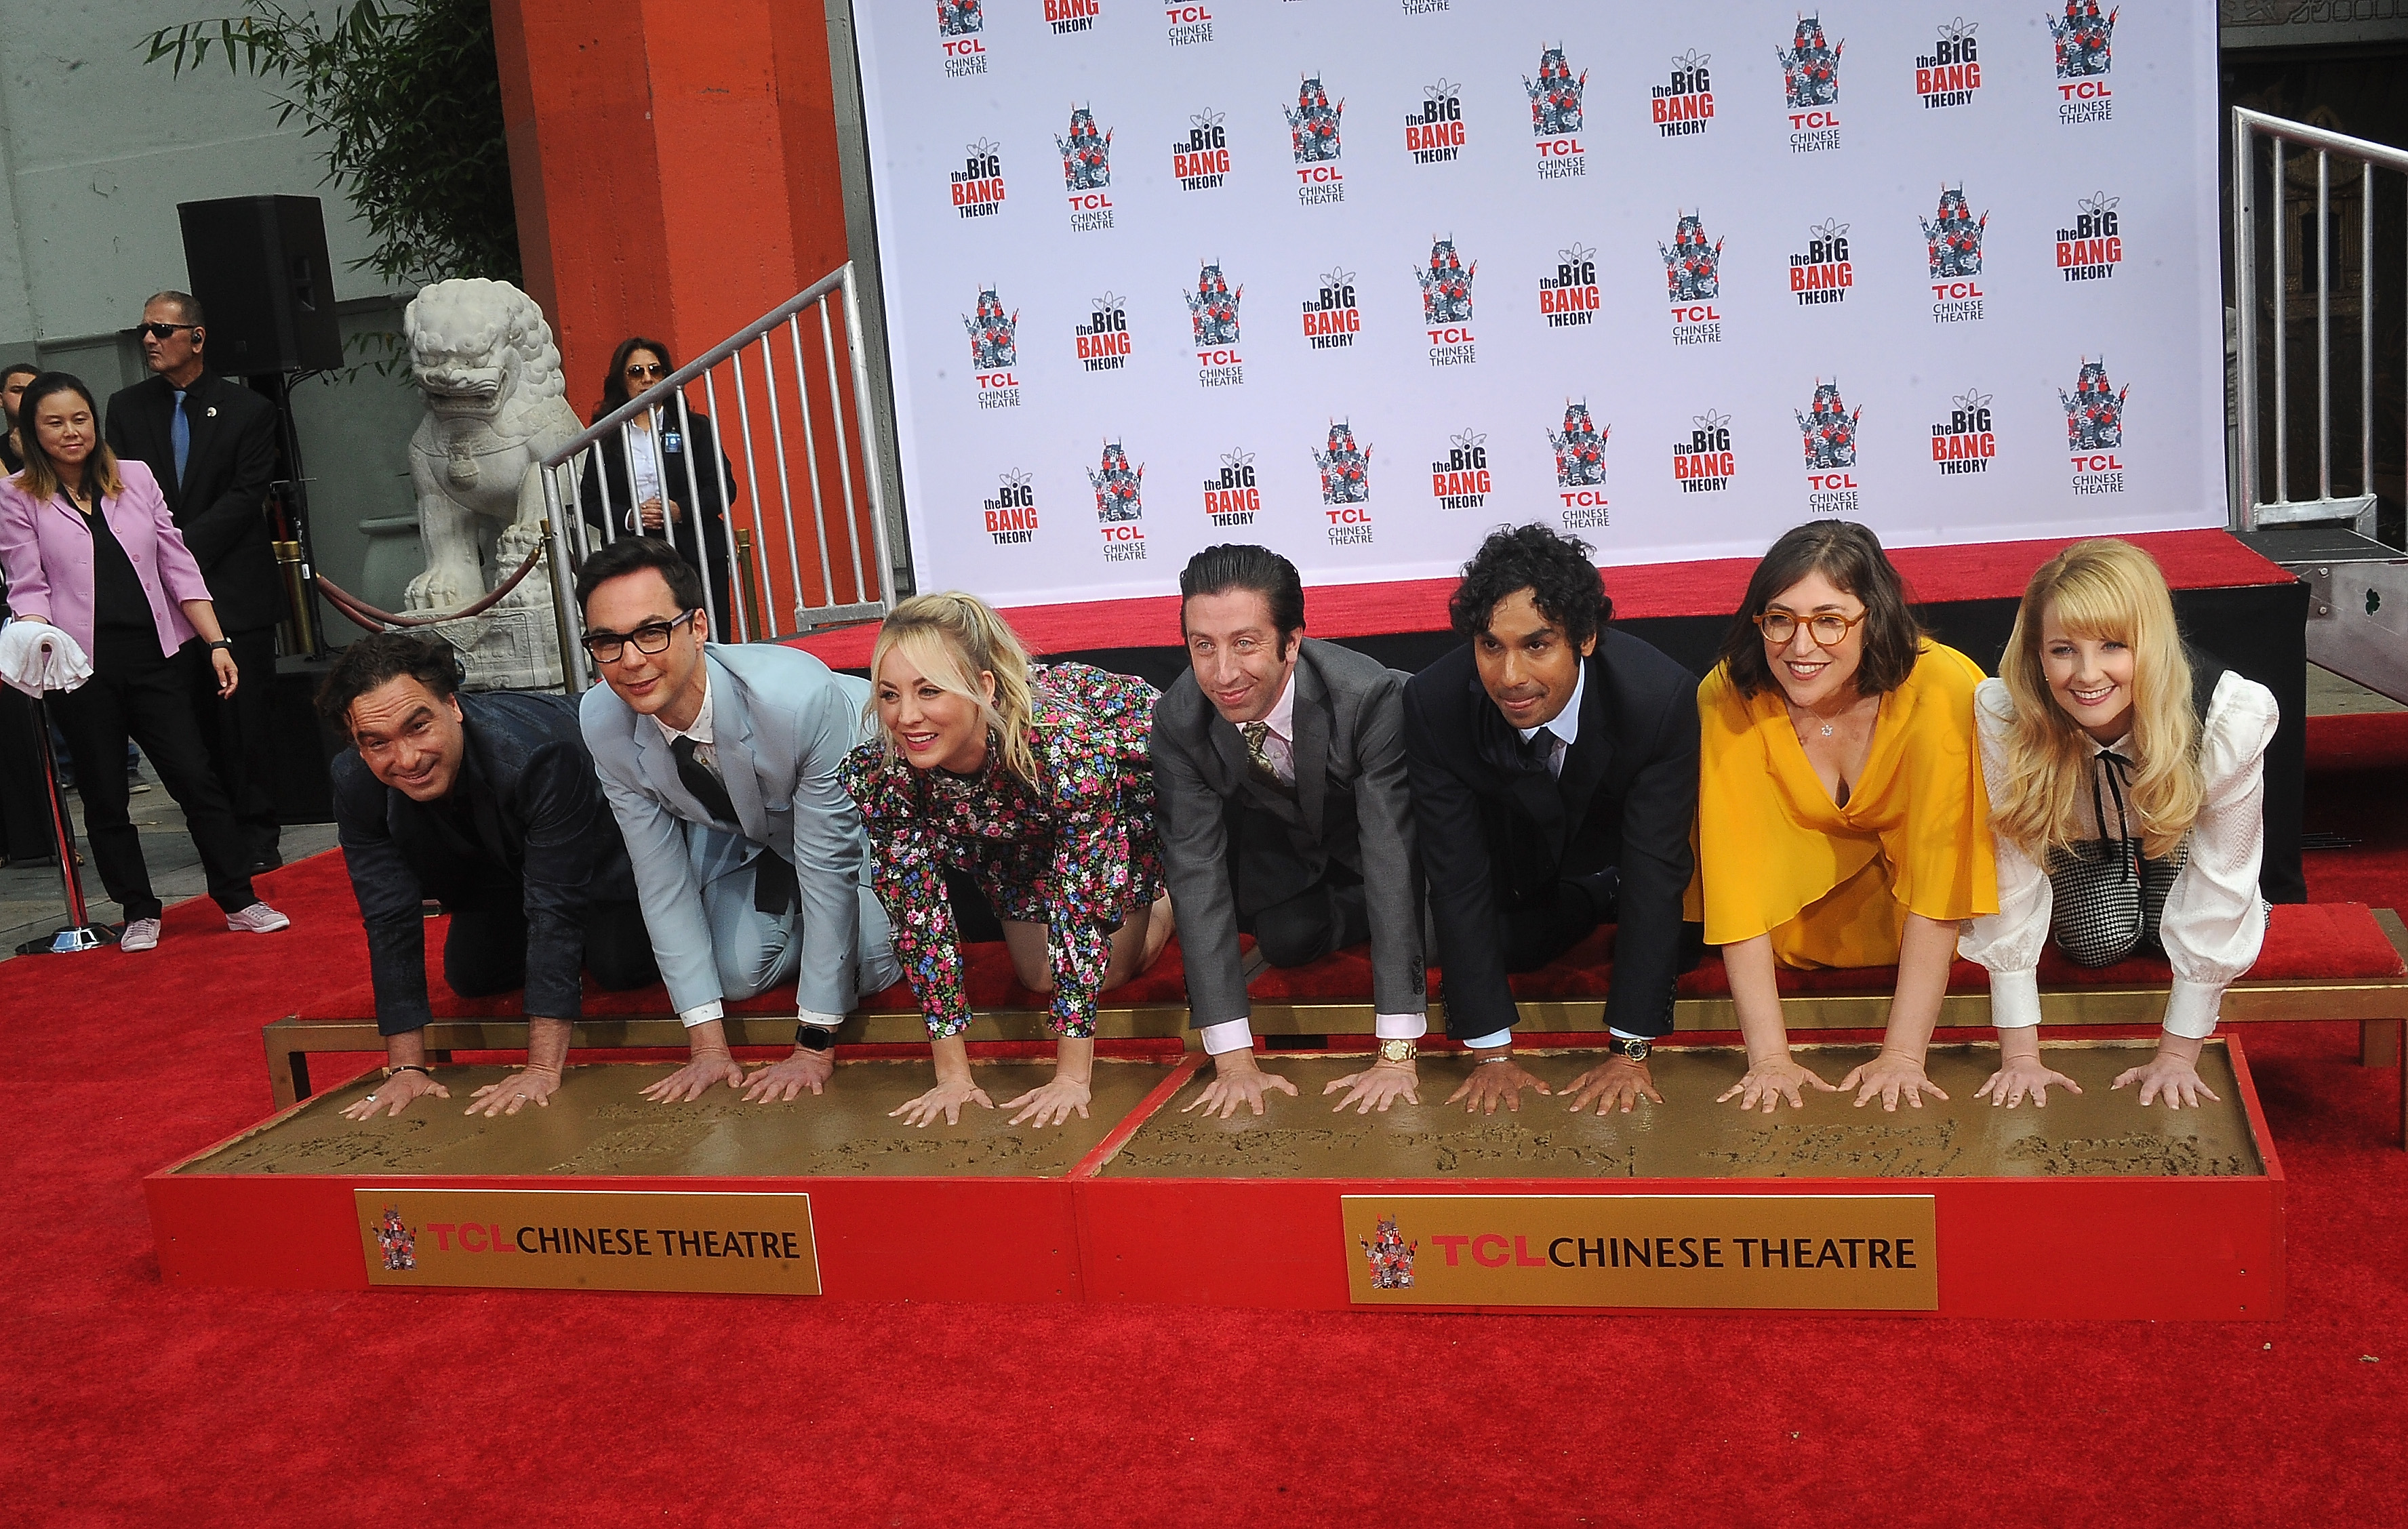 The cast of 'The Big Bang Theory' place their handprints in the cement in front of The TCL Chinese Theatre